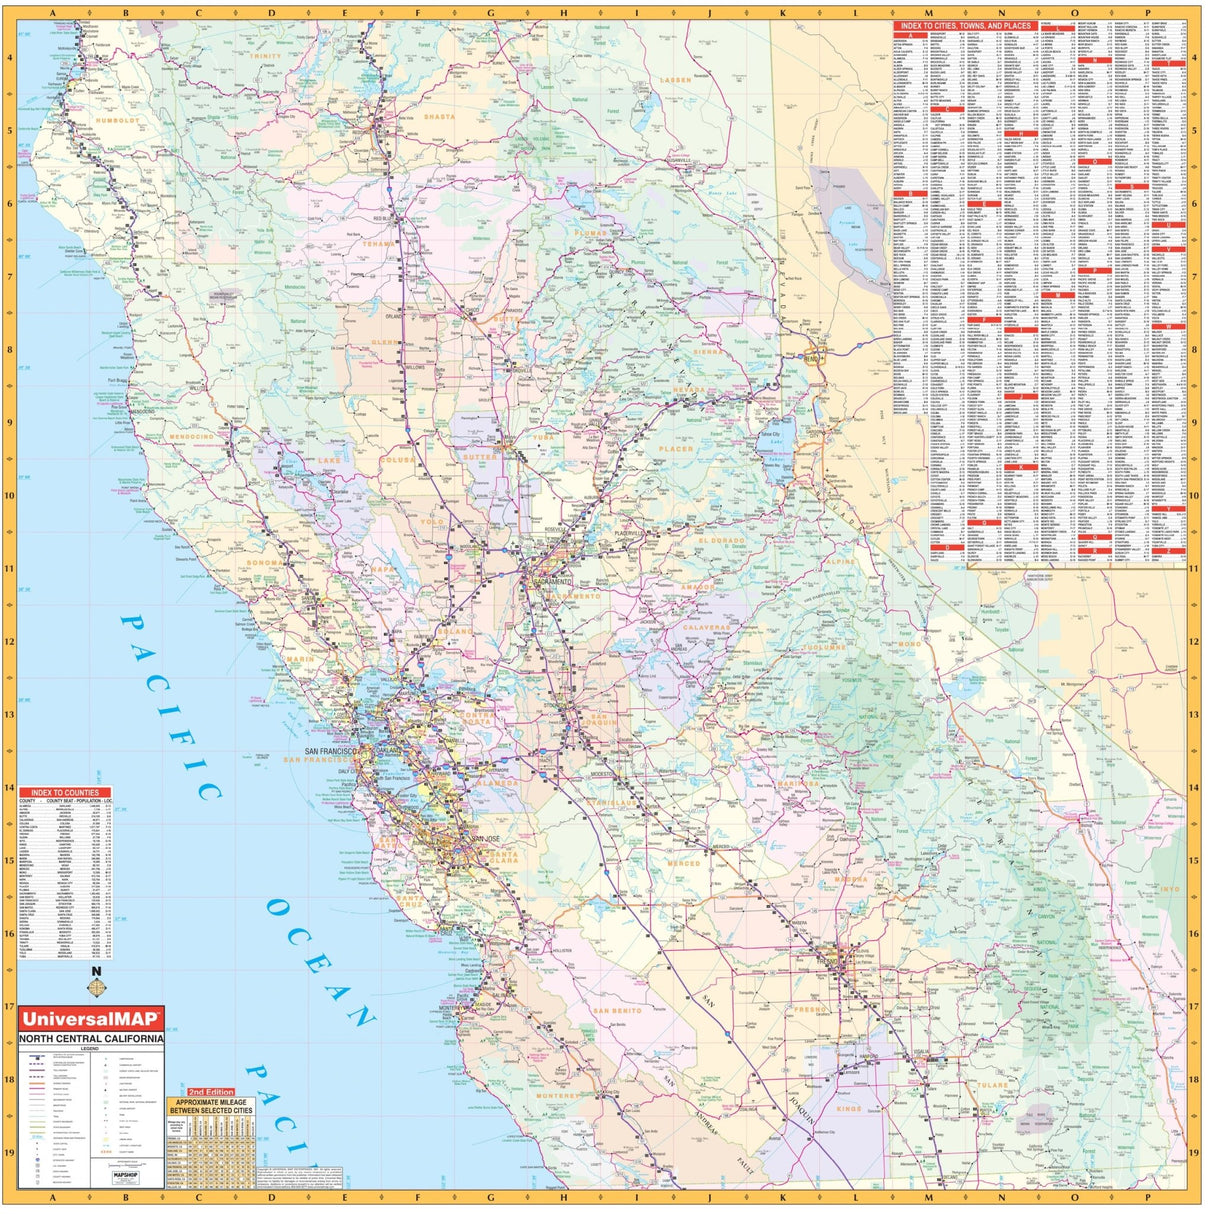 North Central California Regional Wall Map - KA-R-CA-NORTHCENTRAL-PAPER - Ultimate Globes